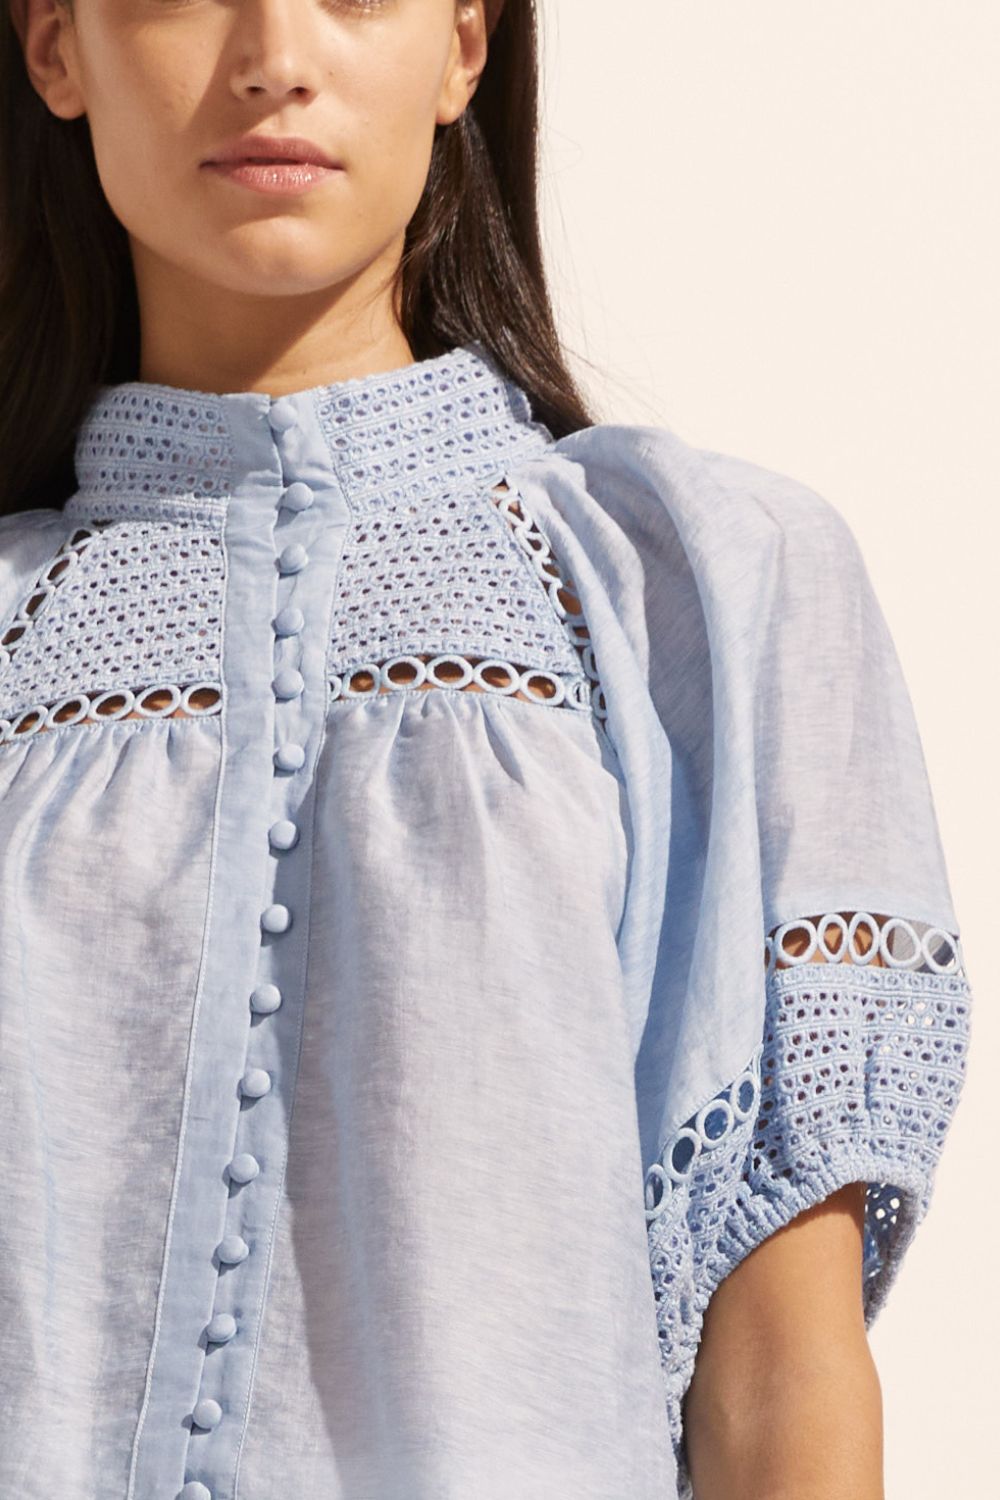 blue, top, high neck, mid-length sleeve, covered buttons, circular lace detailing, close up image